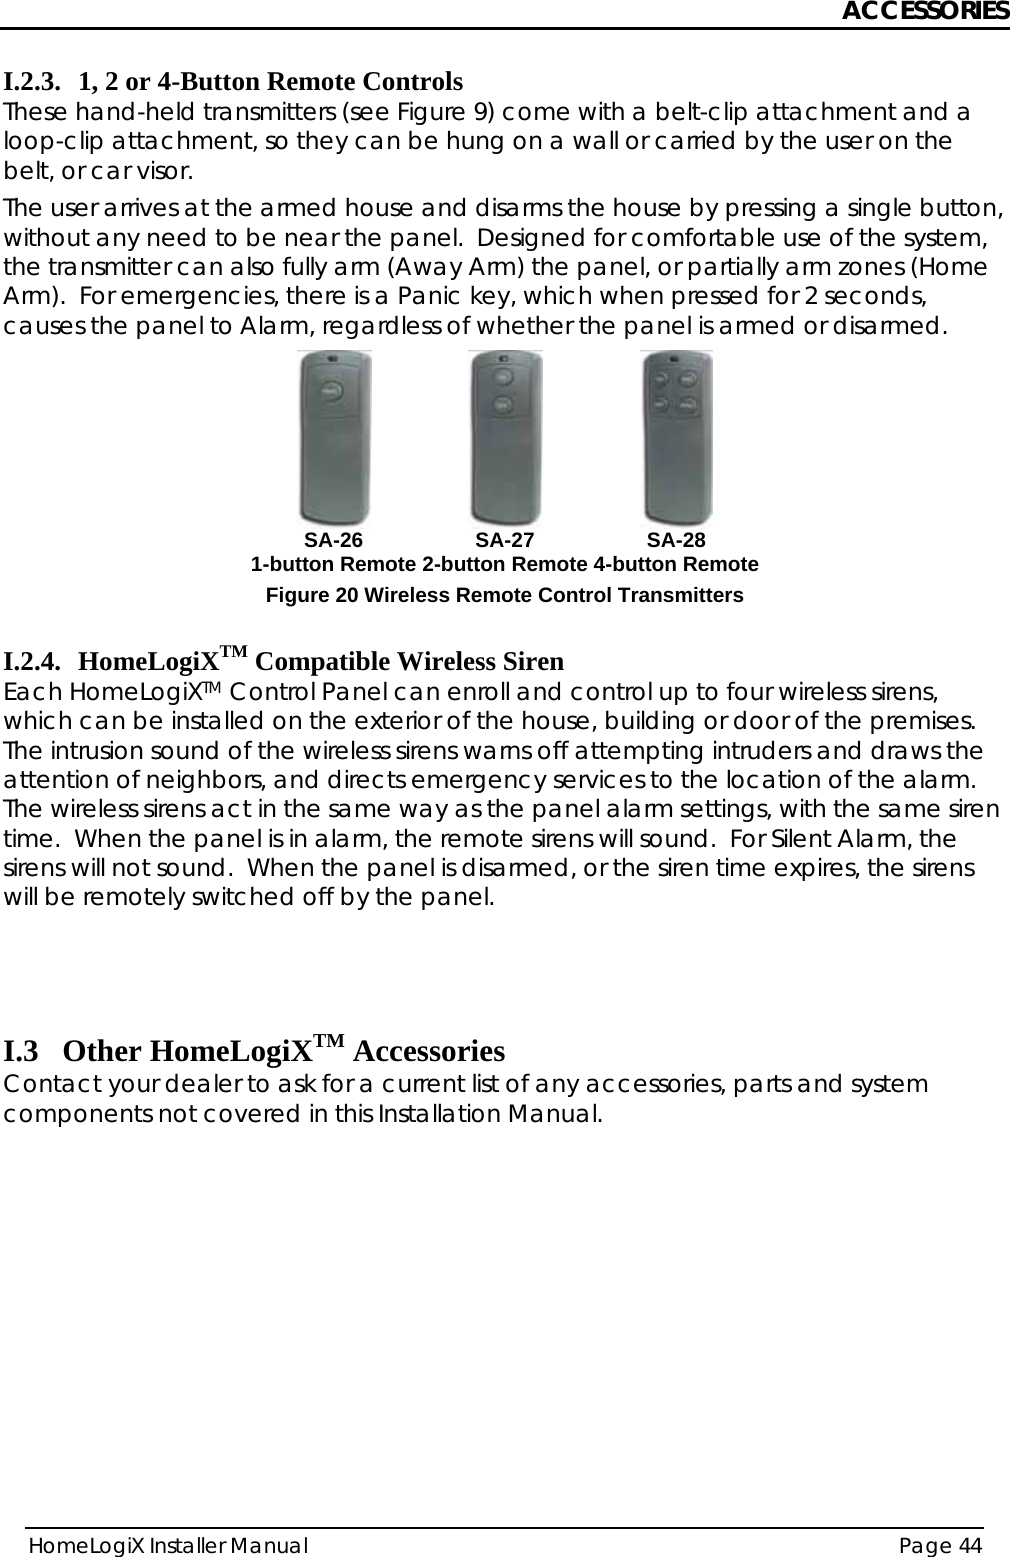 ACCESSORIES HomeLogiX Installer Manual  Page 44  I.2.3. 1, 2 or 4-Button Remote Controls These hand-held transmitters (see Figure 9) come with a belt-clip attachment and a loop-clip attachment, so they can be hung on a wall or carried by the user on the belt, or car visor. The user arrives at the armed house and disarms the house by pressing a single button, without any need to be near the panel.  Designed for comfortable use of the system, the transmitter can also fully arm (Away Arm) the panel, or partially arm zones (Home Arm).  For emergencies, there is a Panic key, which when pressed for 2 seconds, causes the panel to Alarm, regardless of whether the panel is armed or disarmed.  SA-26 1-button Remote SA-27 2-button Remote SA-28 4-button RemoteFigure 20 Wireless Remote Control Transmitters  I.2.4. HomeLogiXTM Compatible Wireless Siren Each HomeLogiXTM Control Panel can enroll and control up to four wireless sirens, which can be installed on the exterior of the house, building or door of the premises.  The intrusion sound of the wireless sirens warns off attempting intruders and draws the attention of neighbors, and directs emergency services to the location of the alarm.  The wireless sirens act in the same way as the panel alarm settings, with the same siren time.  When the panel is in alarm, the remote sirens will sound.  For Silent Alarm, the sirens will not sound.  When the panel is disarmed, or the siren time expires, the sirens will be remotely switched off by the panel.    I.3 Other HomeLogiXTM Accessories Contact your dealer to ask for a current list of any accessories, parts and system components not covered in this Installation Manual.    